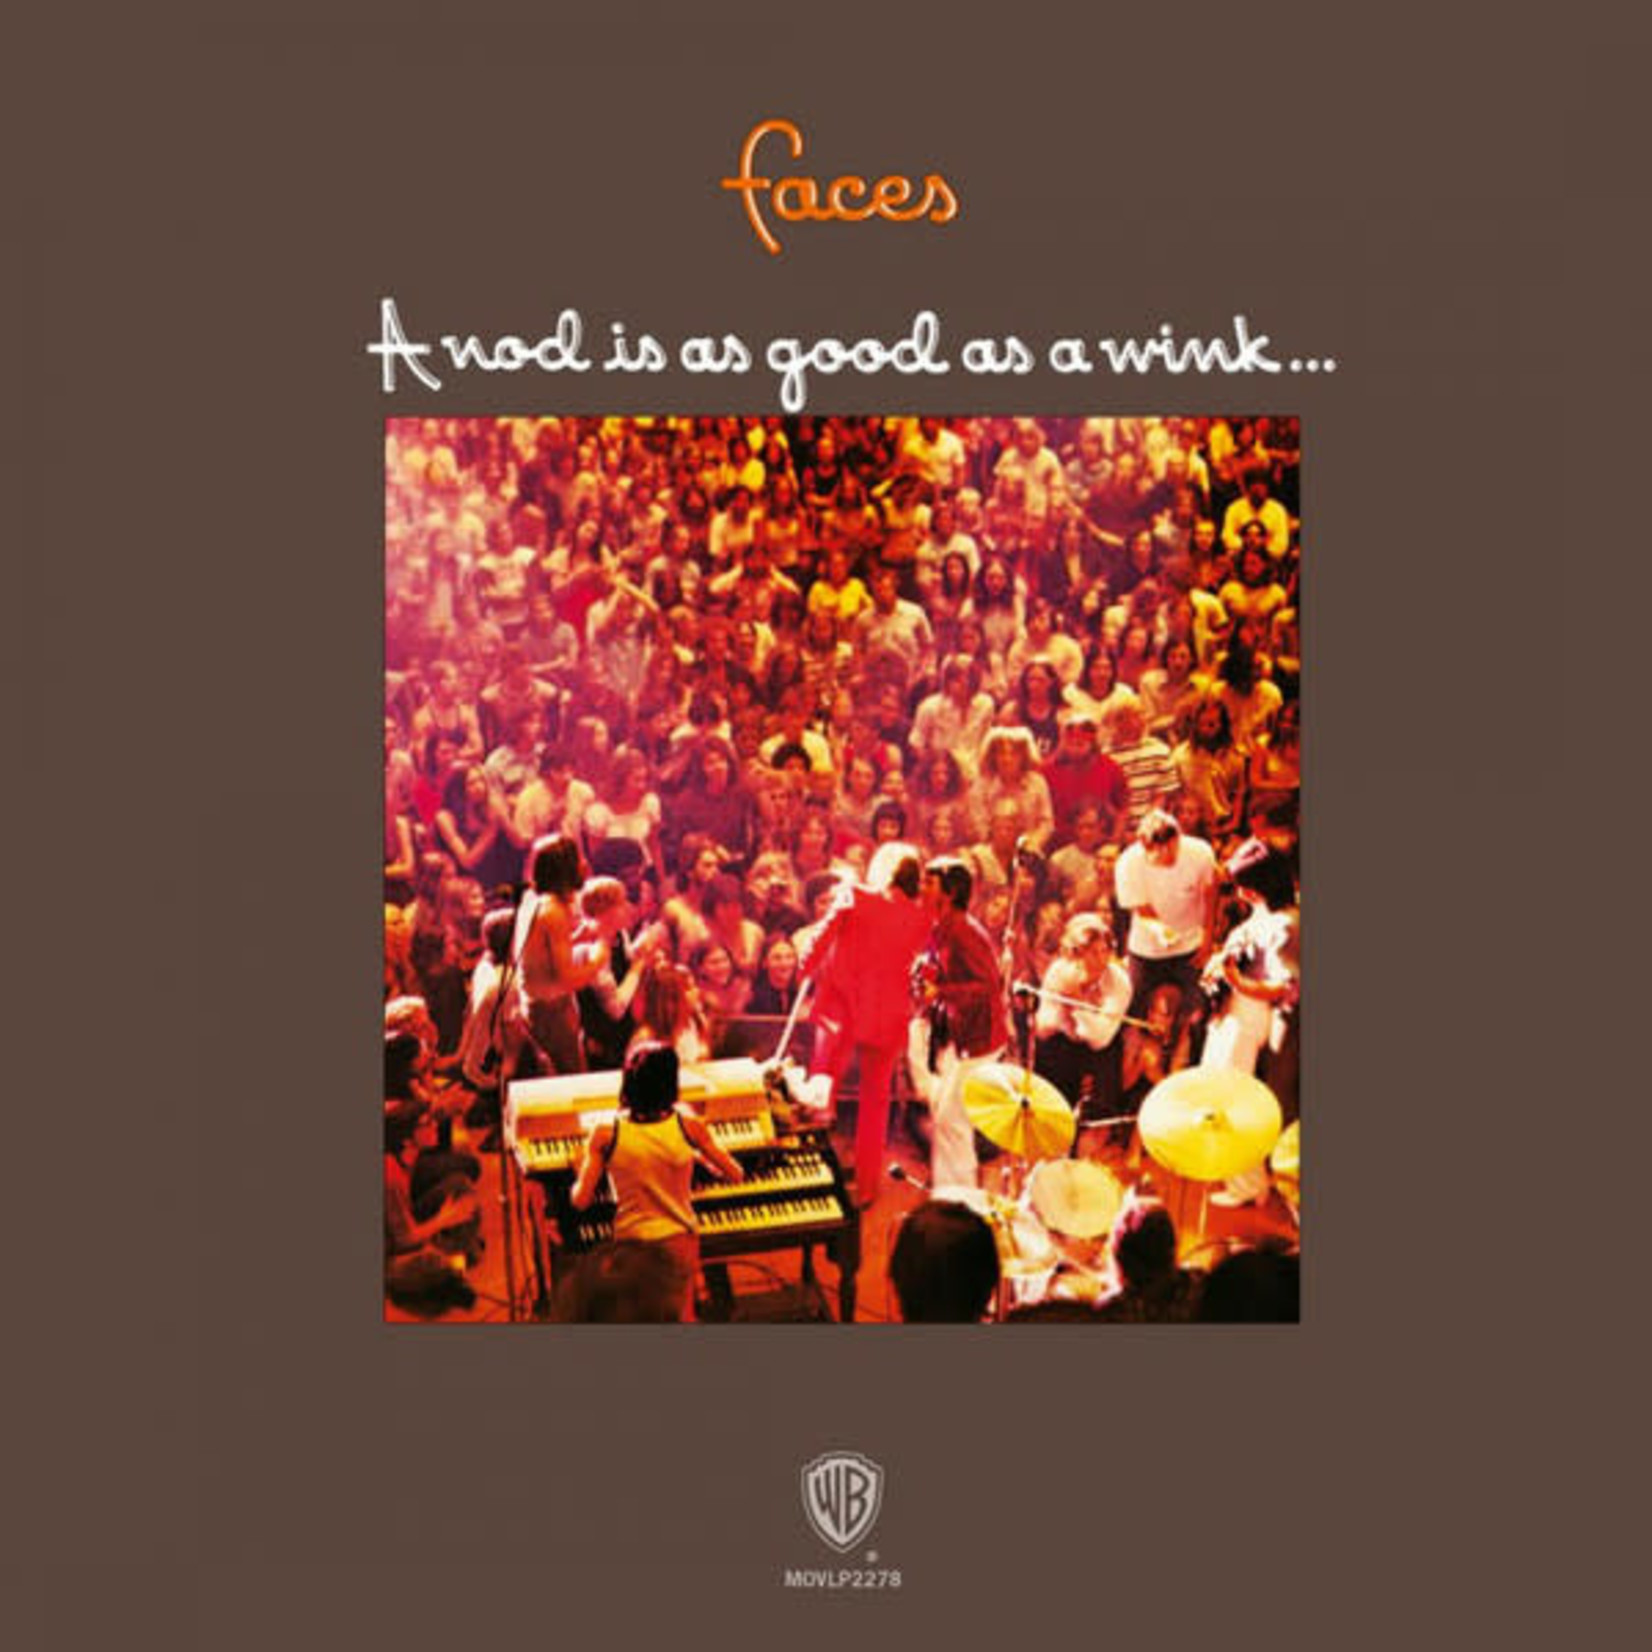 [New] Faces (Small Faces) - A Nod Is As Good As a Wink To a Blind Horse